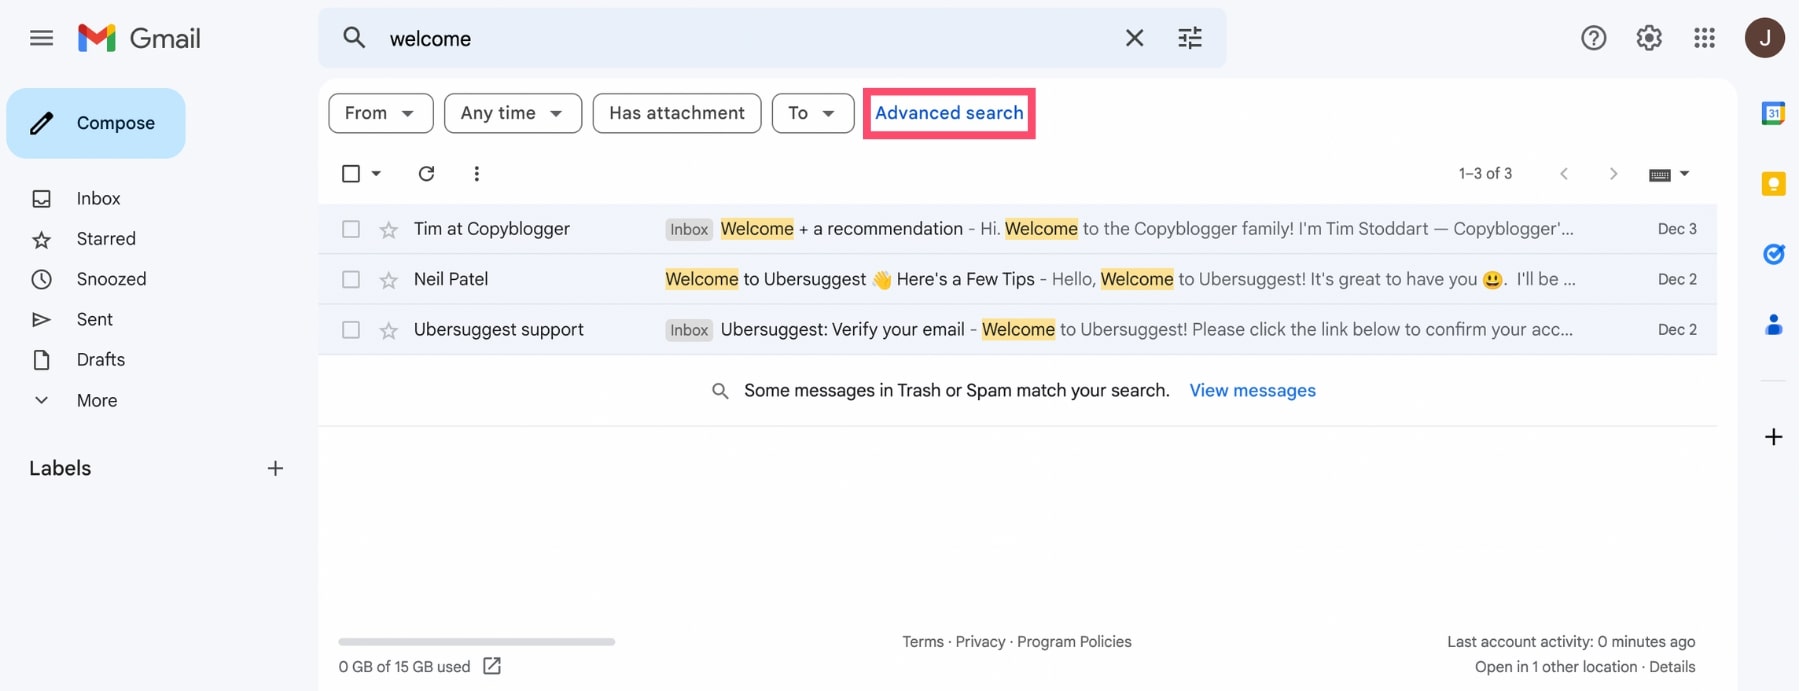 Advanced search on Gmail